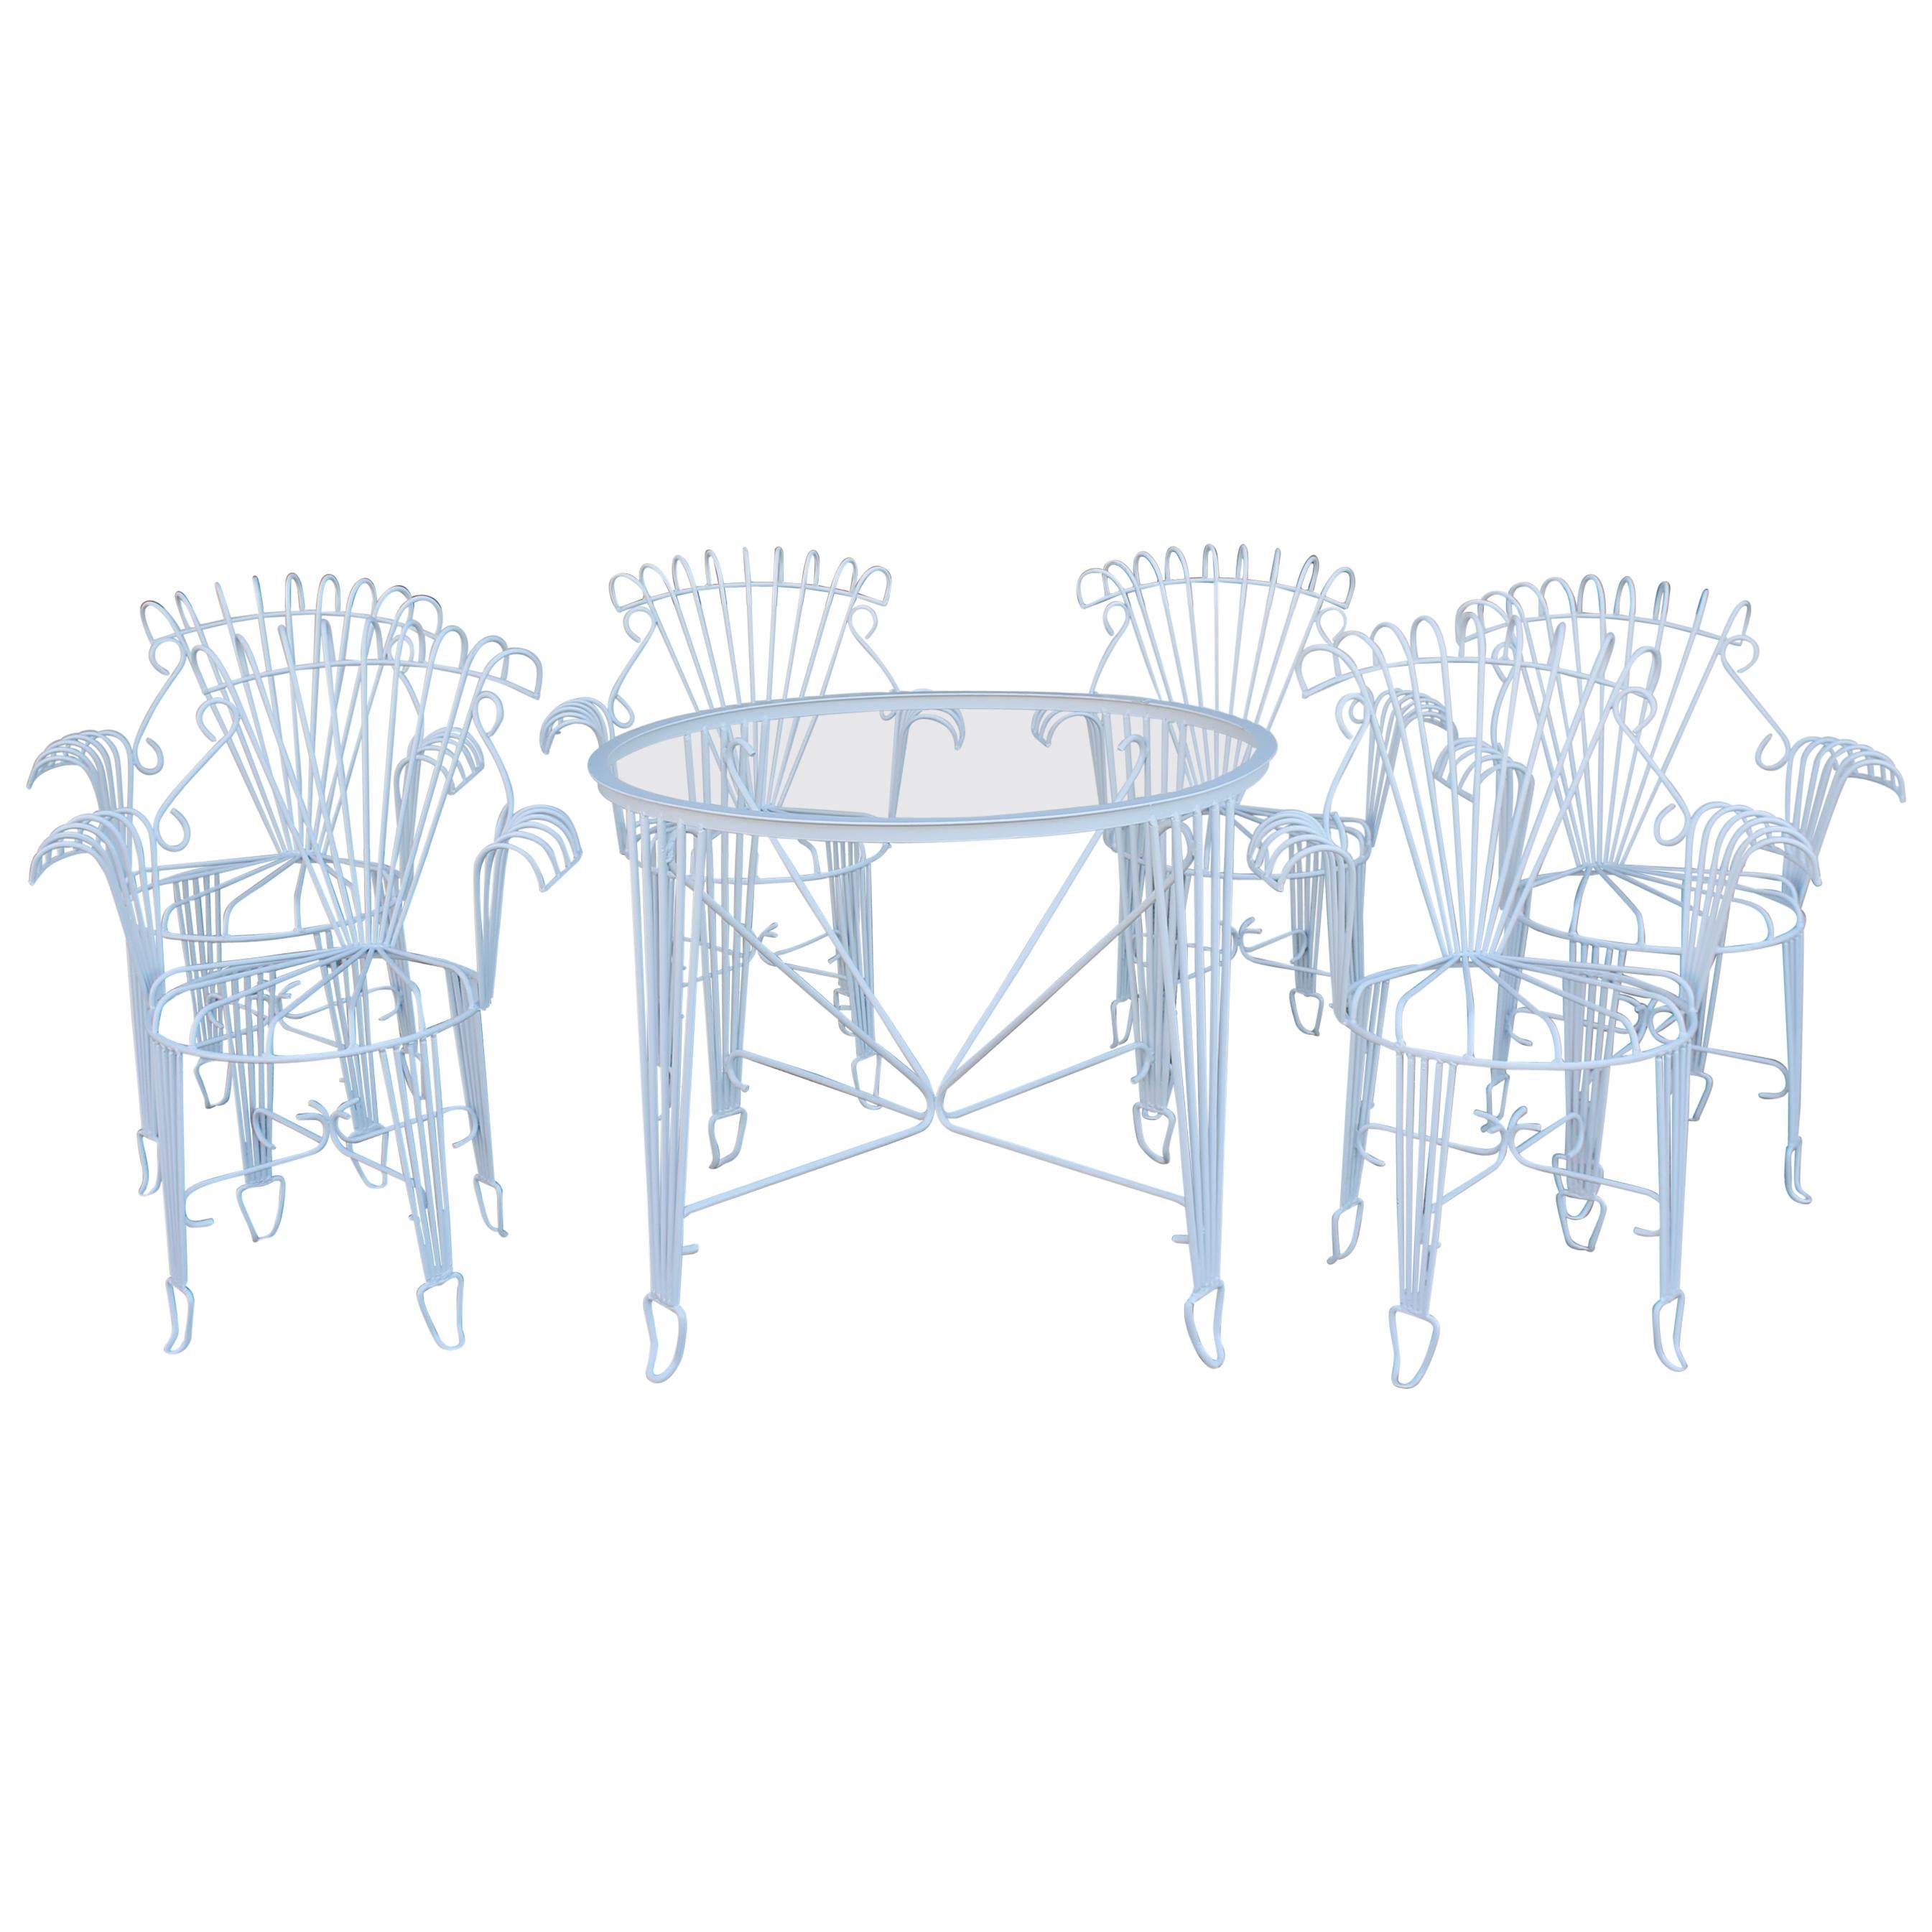 Patio Set Consisting of Six Chairs and Table 